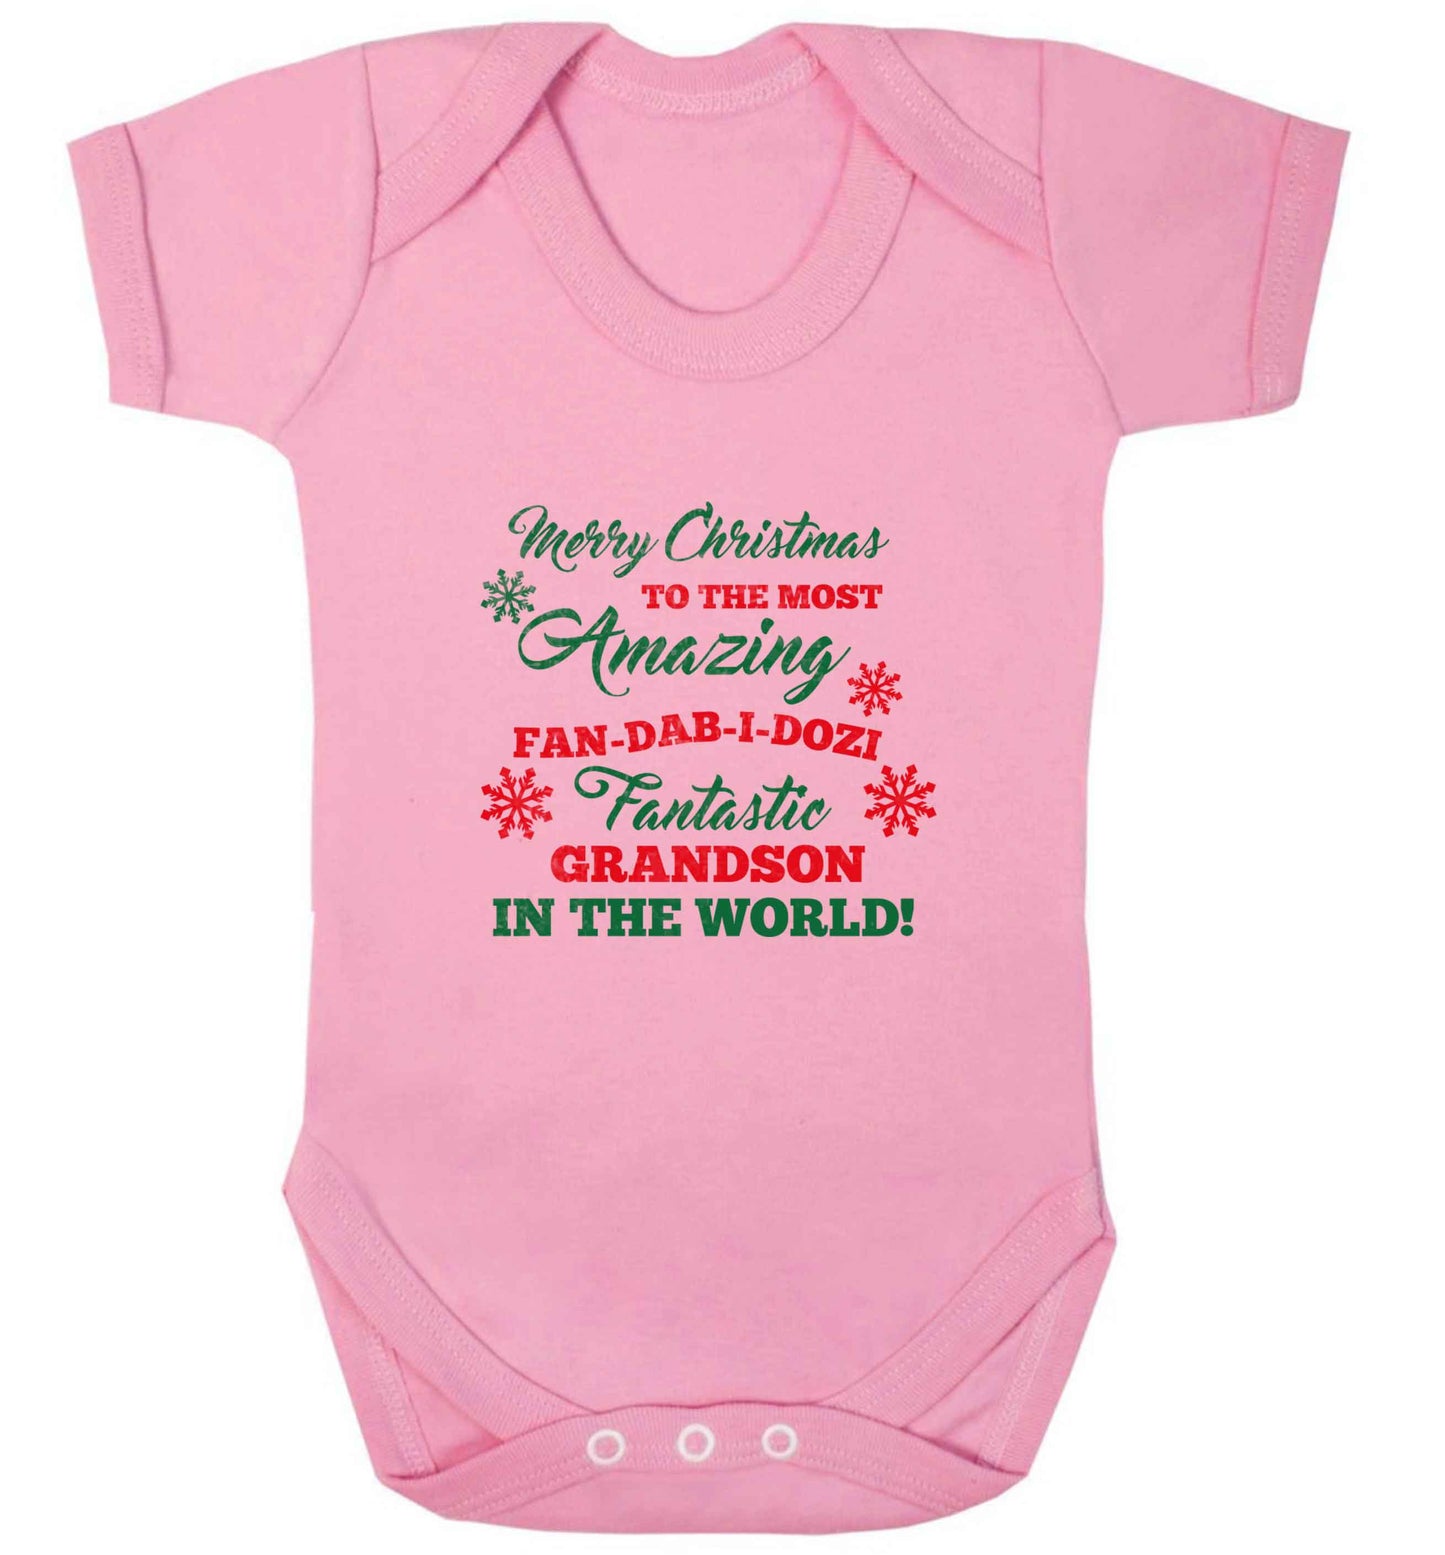 Merry Christmas to the most amazing fan-dab-i-dozi fantasic Grandson in the world baby vest pale pink 18-24 months